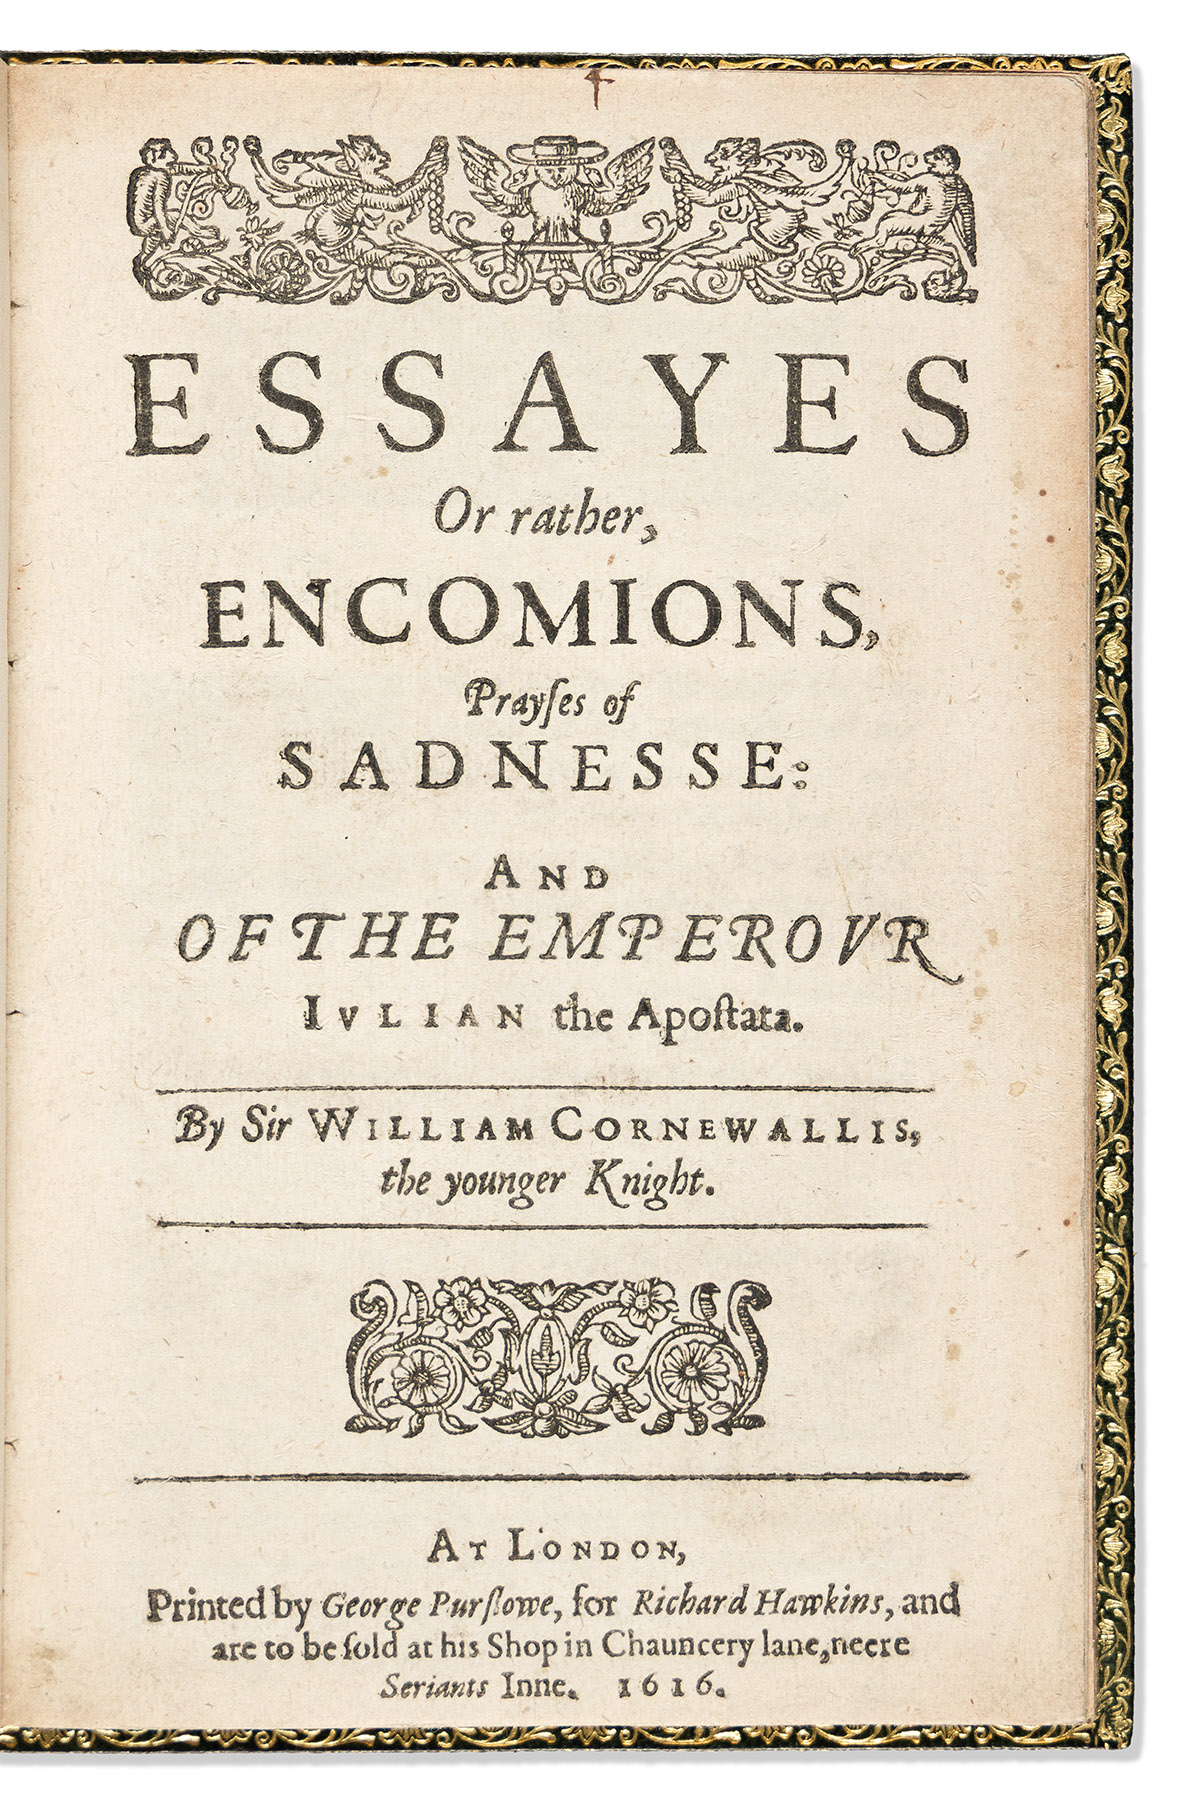 Cornwallis, Sir William (1579-1614) Essayes Or Rather, Encomions, Prayses of Sadnesse: and of the Emperour Julian the Apostata.